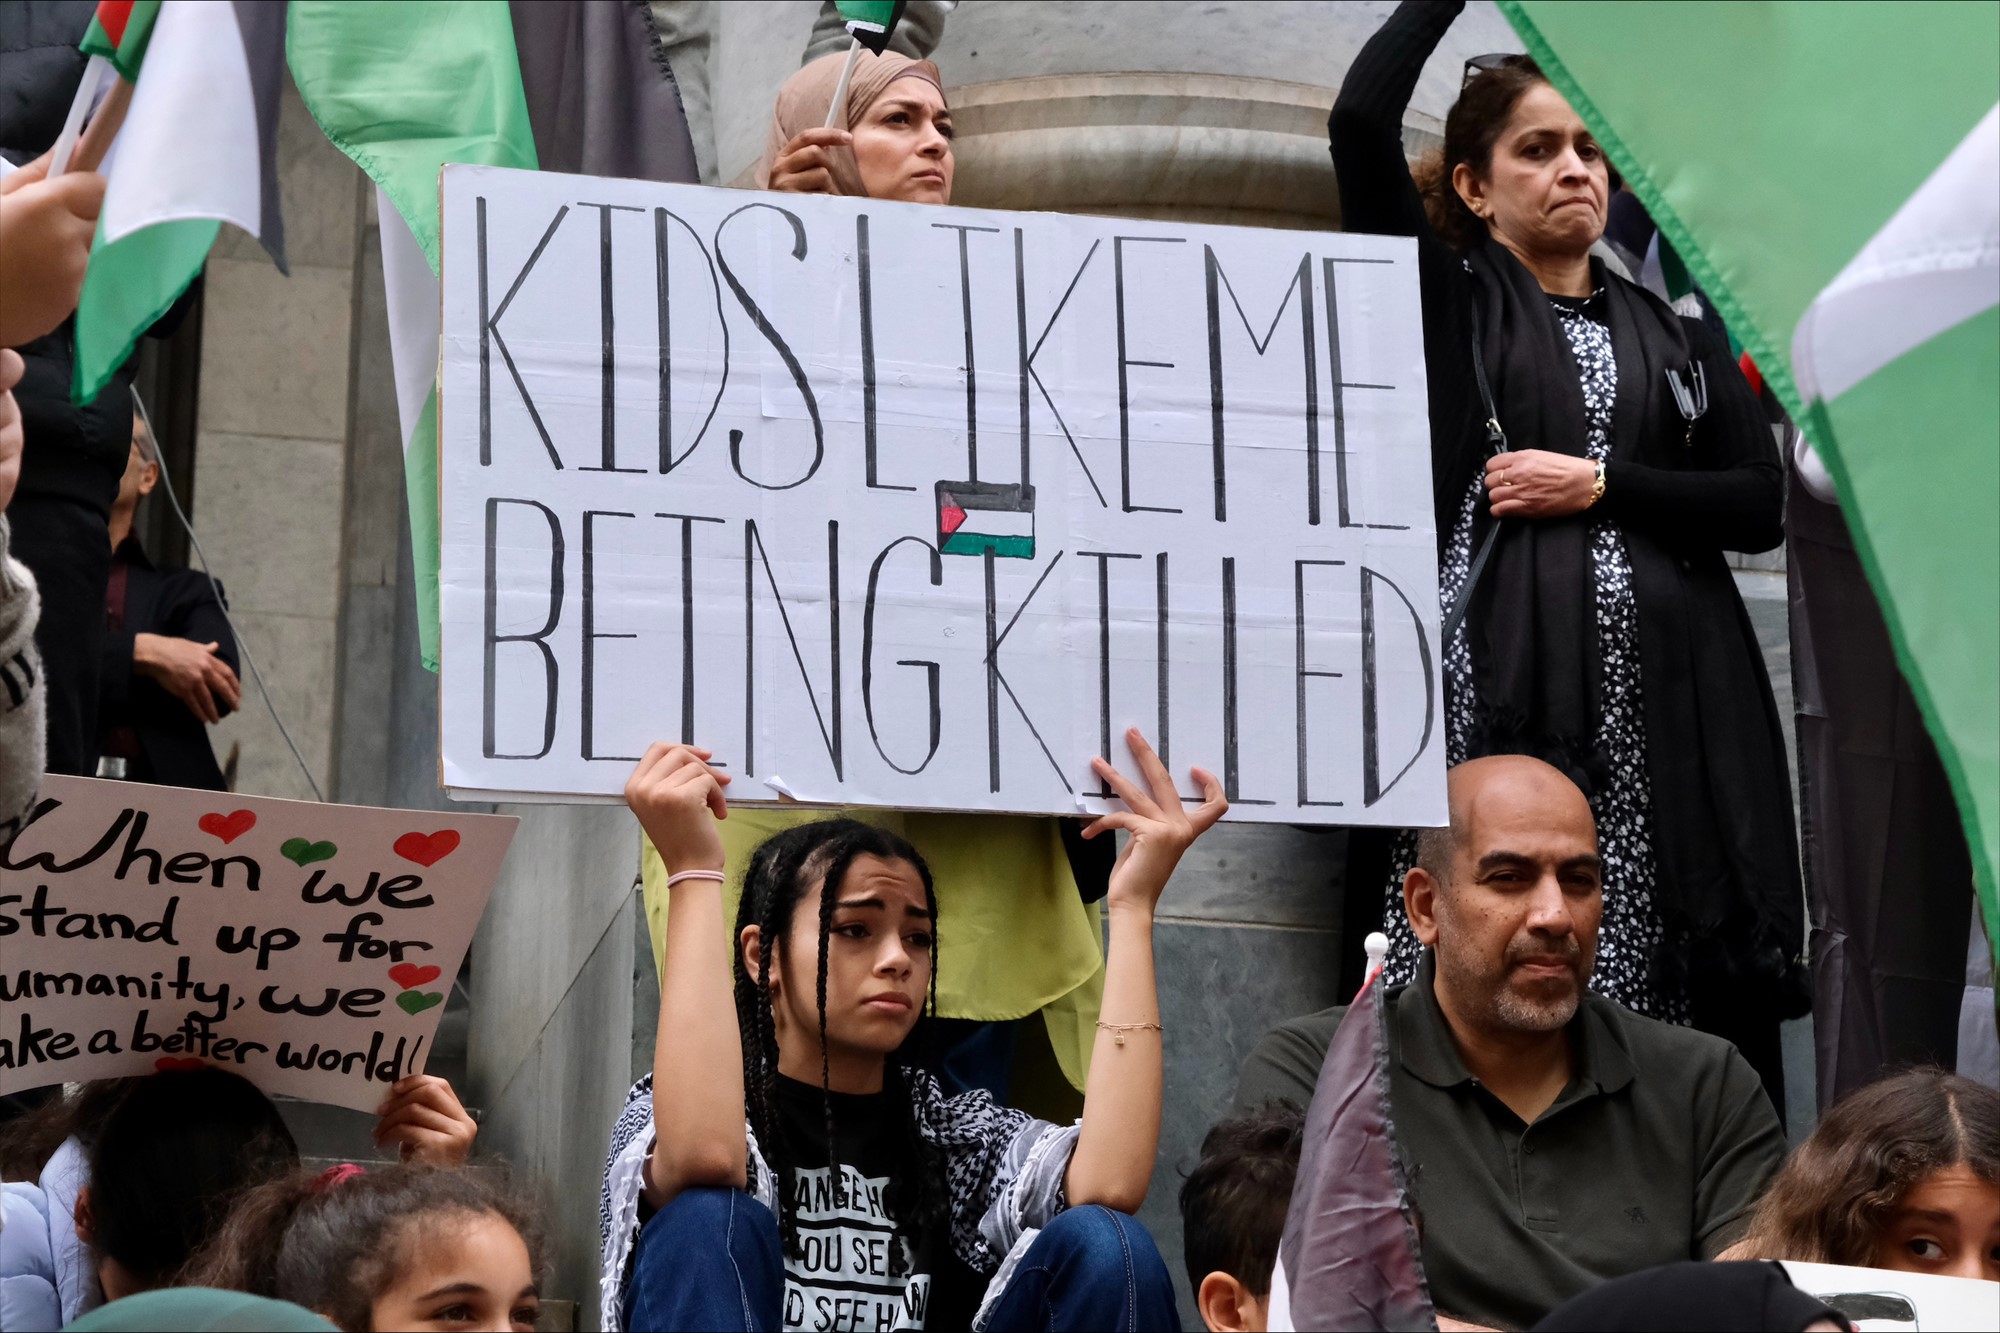 A girl with braids holds a sign saying "Kids like me being killed".